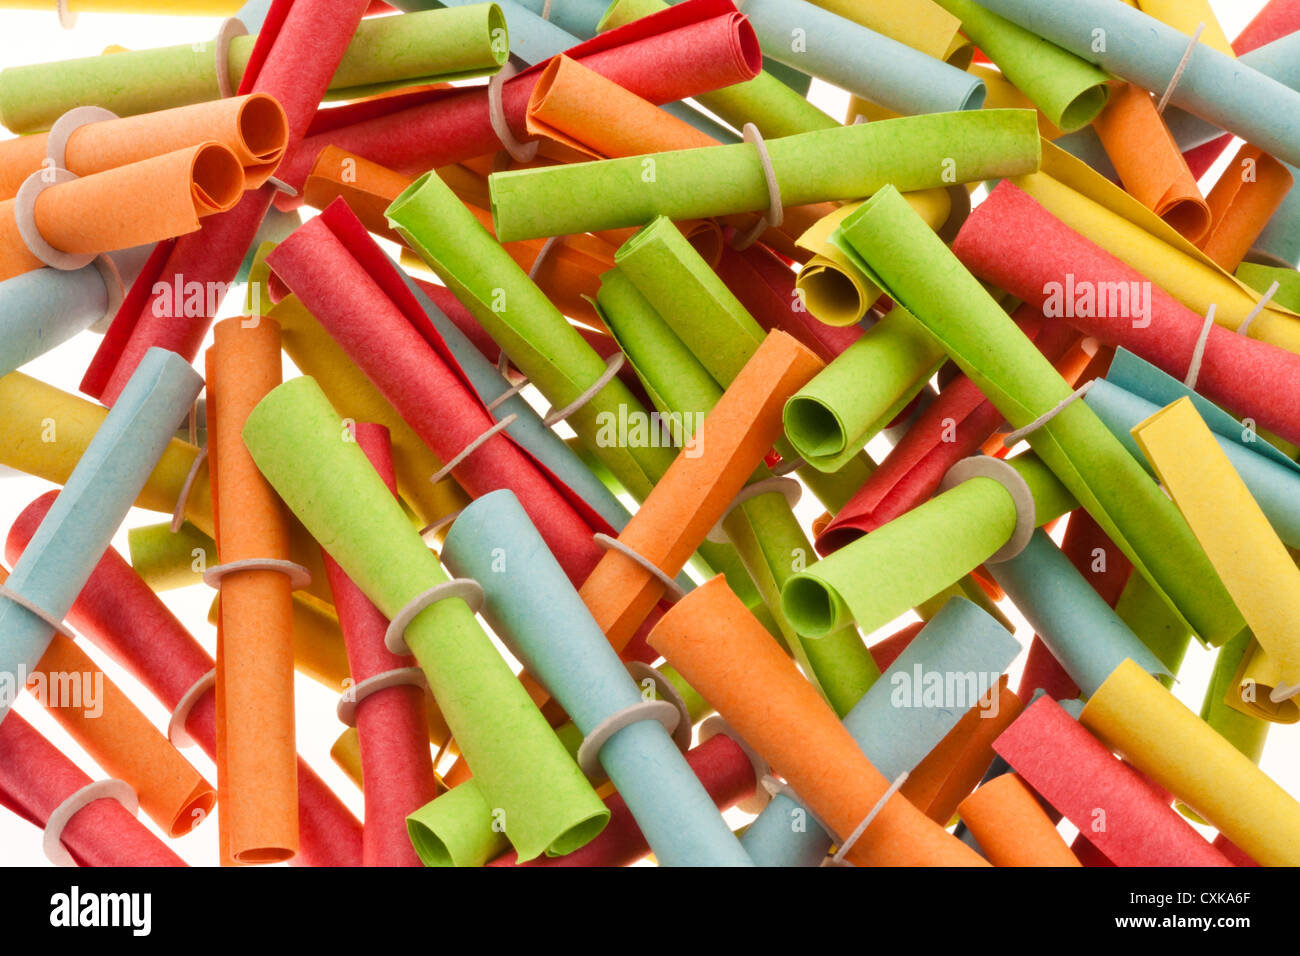 Colorful Chinese hapless Stock Photo